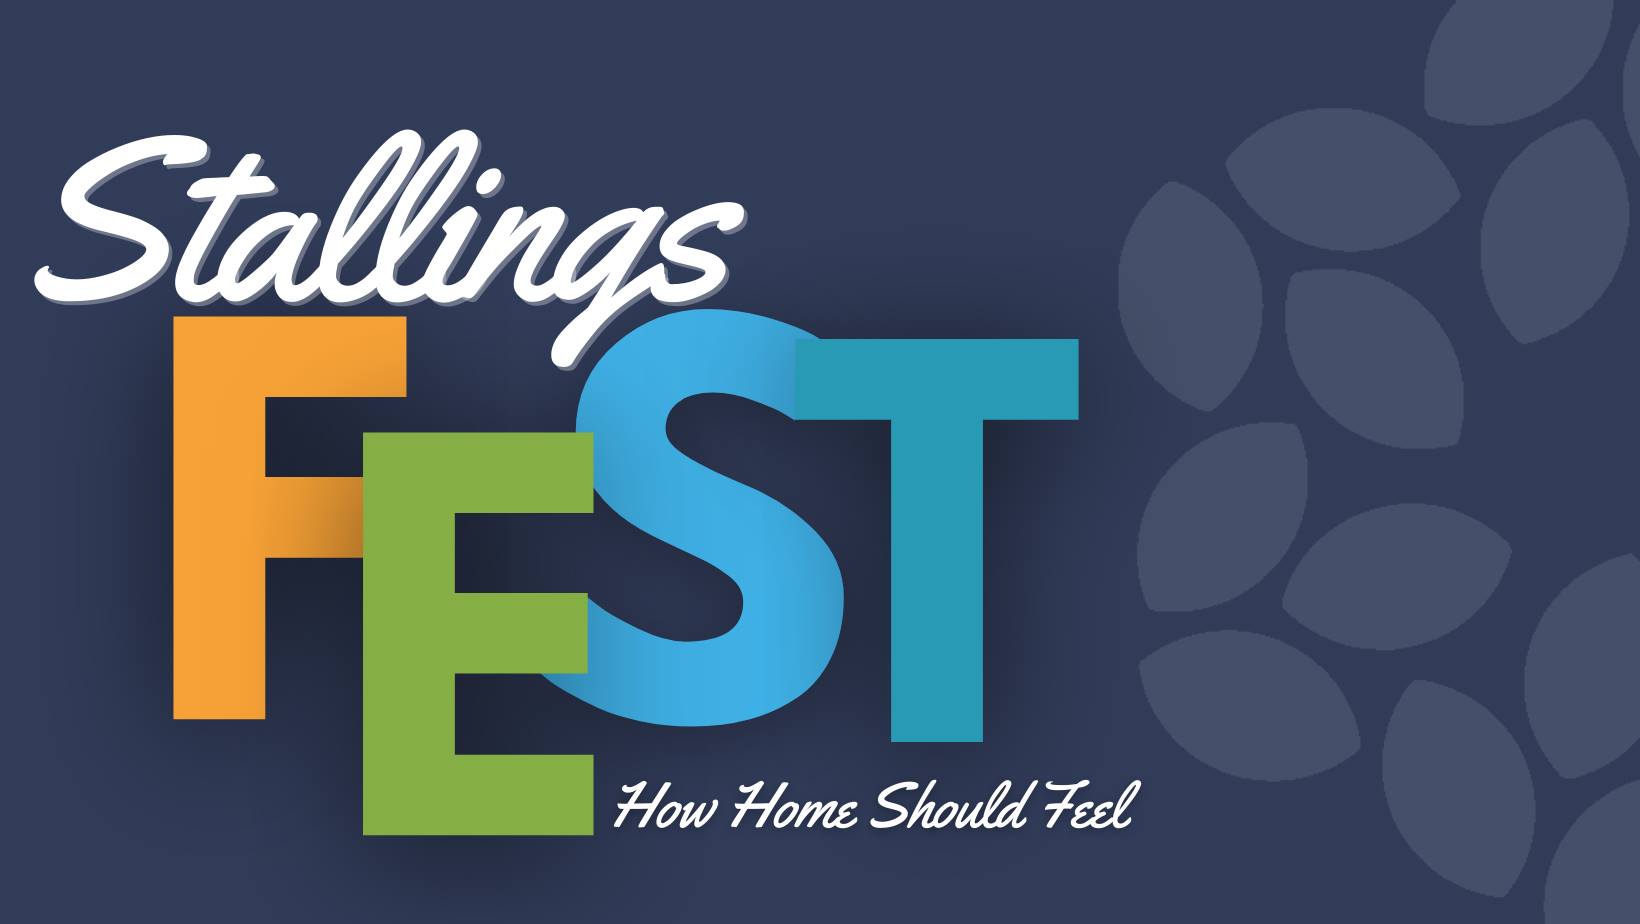 Stallings Fest 2021 > Events